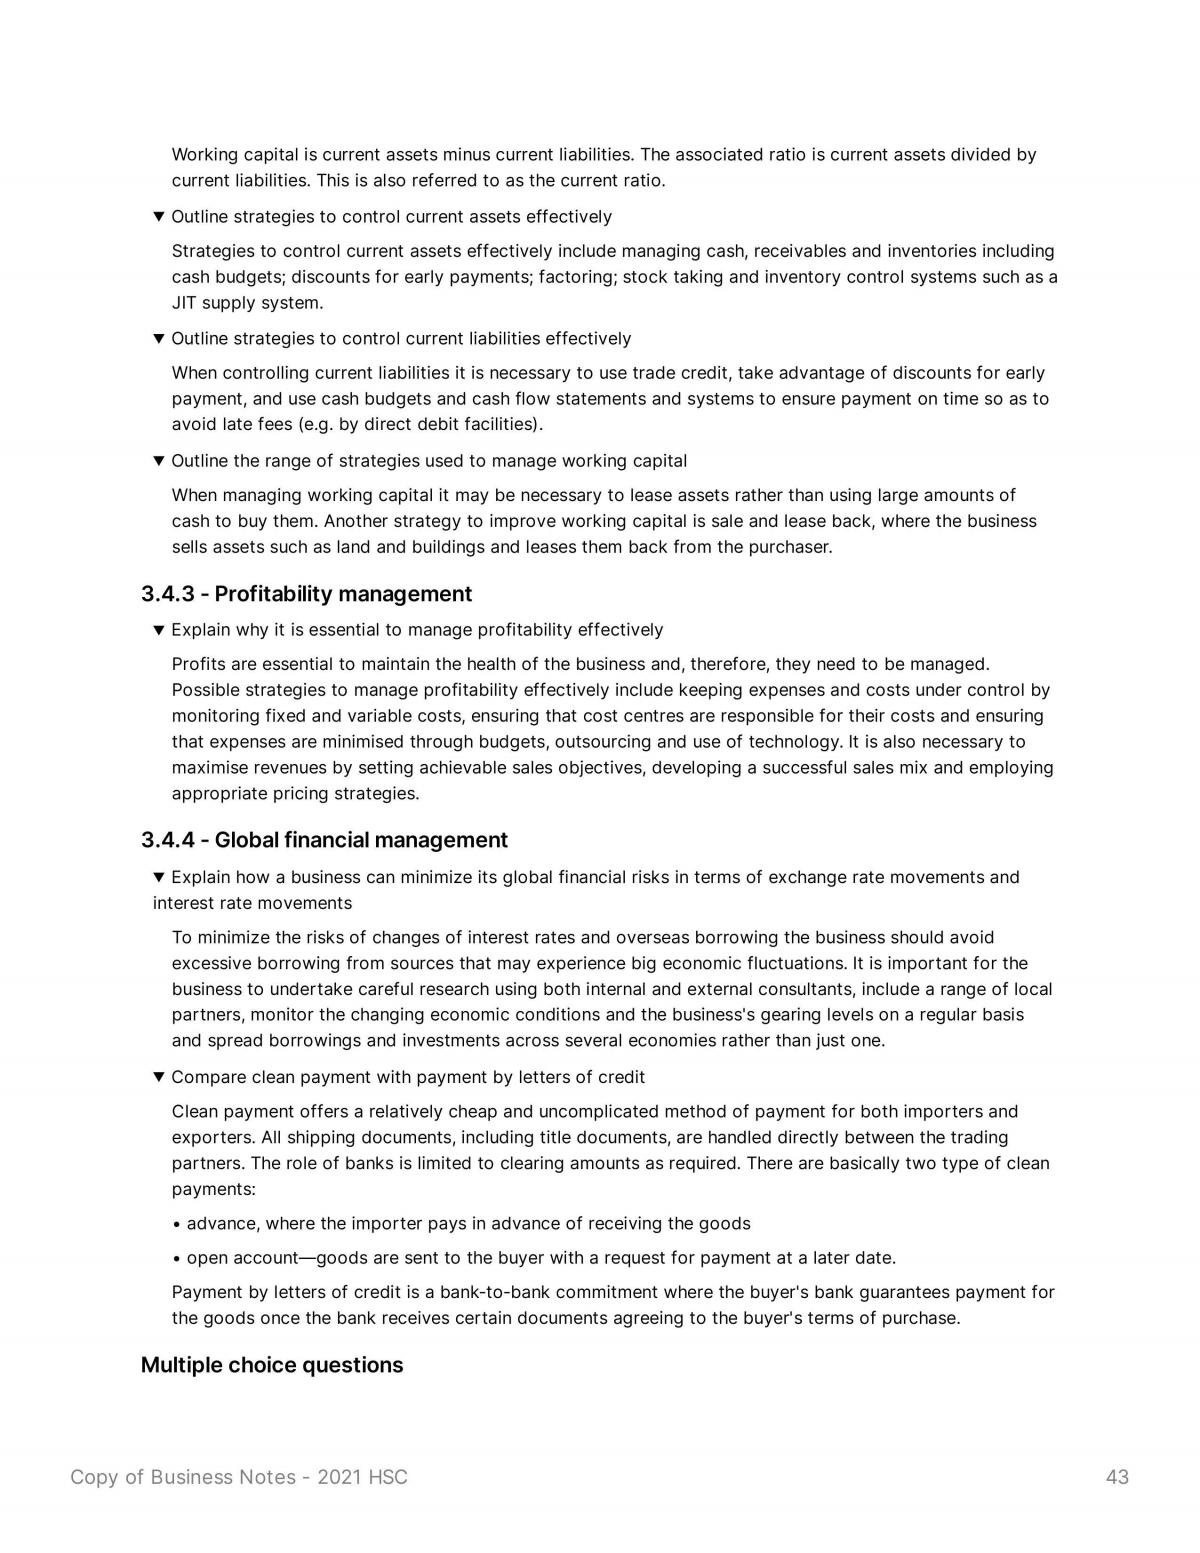 Business Notes - 2021 HSC - Page 43